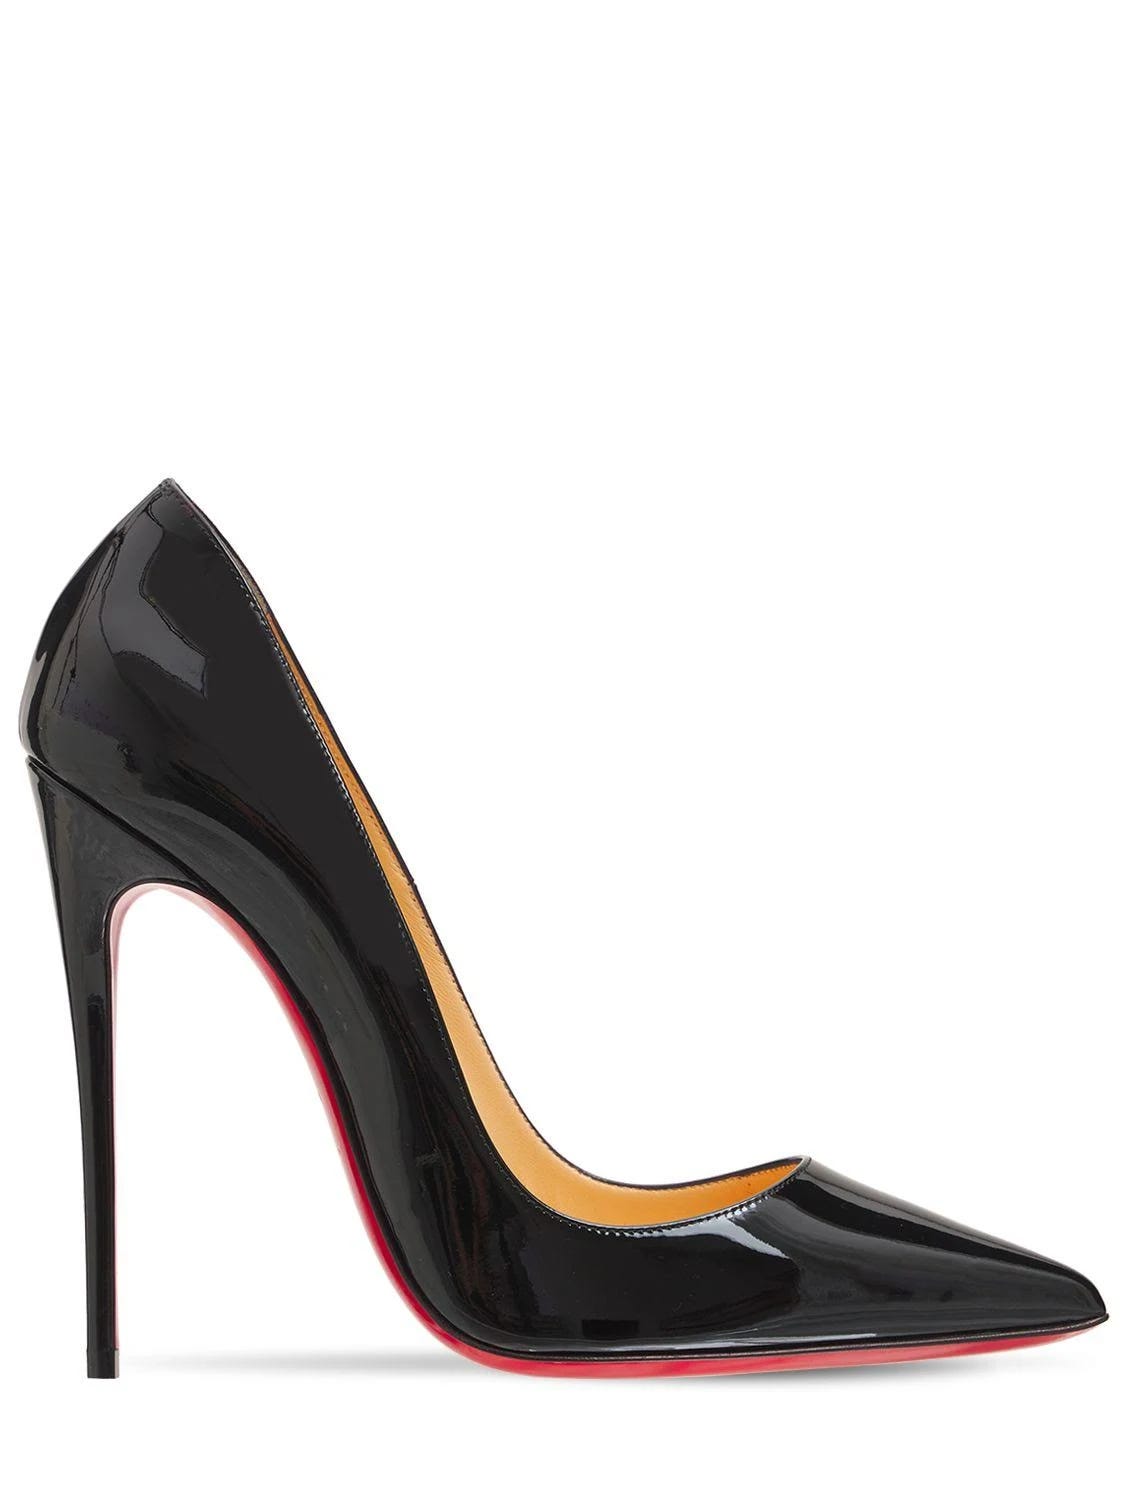 Stylish Louboutin So Kate Pumps in Patent Leather - Black/Red | Image